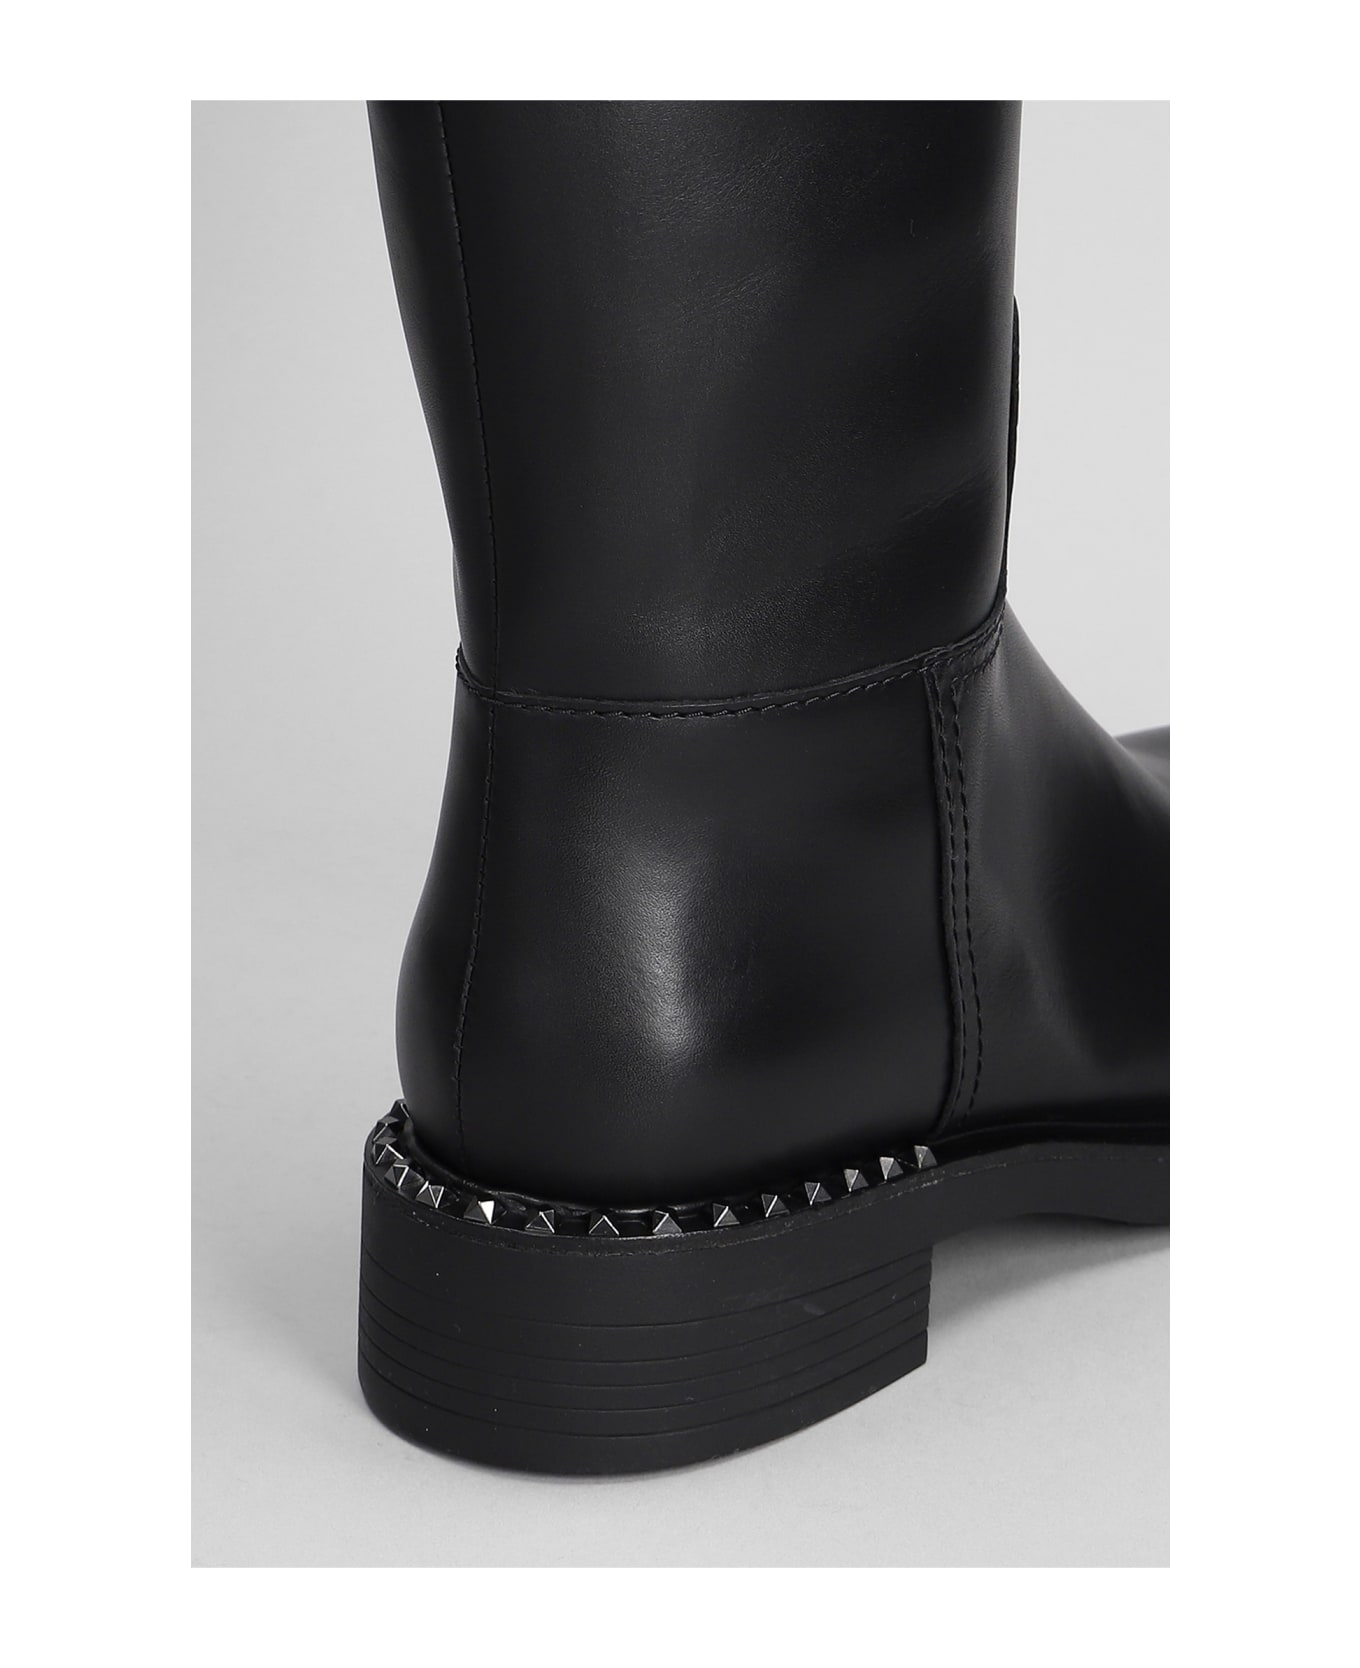 Ash Faith Low Heels Boots In Black Leather - Black ブーツ